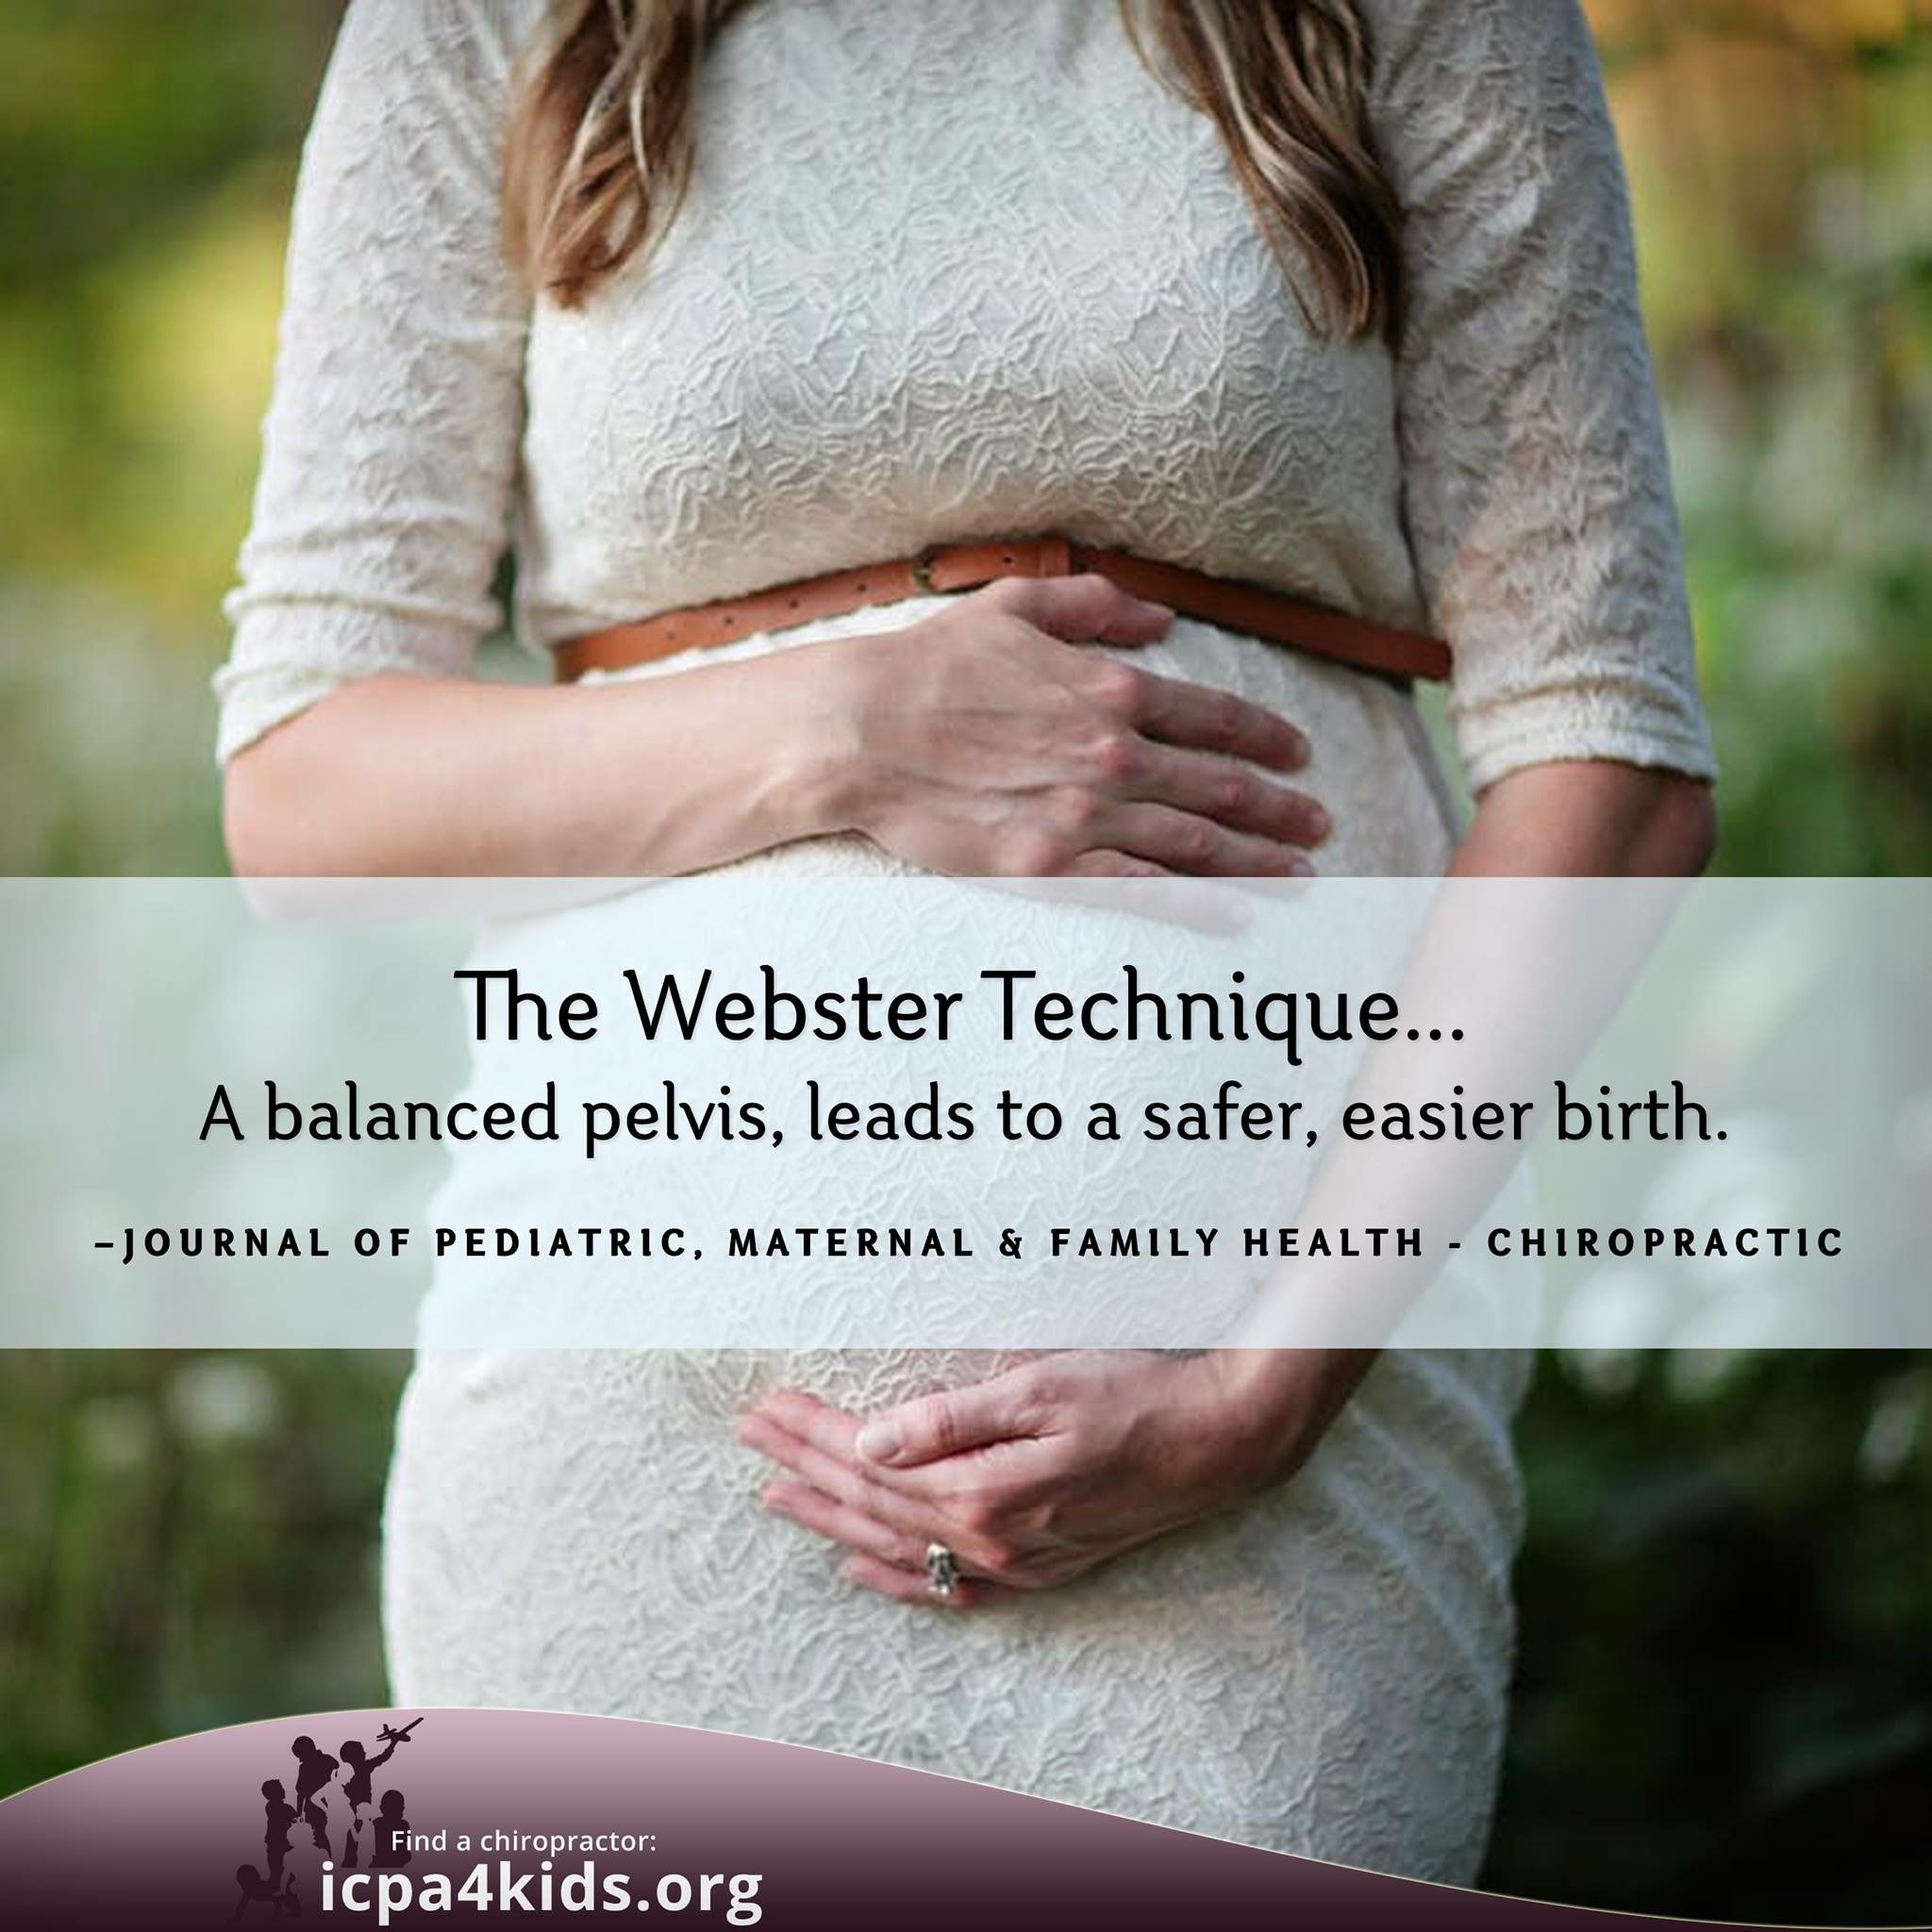 How Often Should I Go to the Chiropractor While Pregnant?